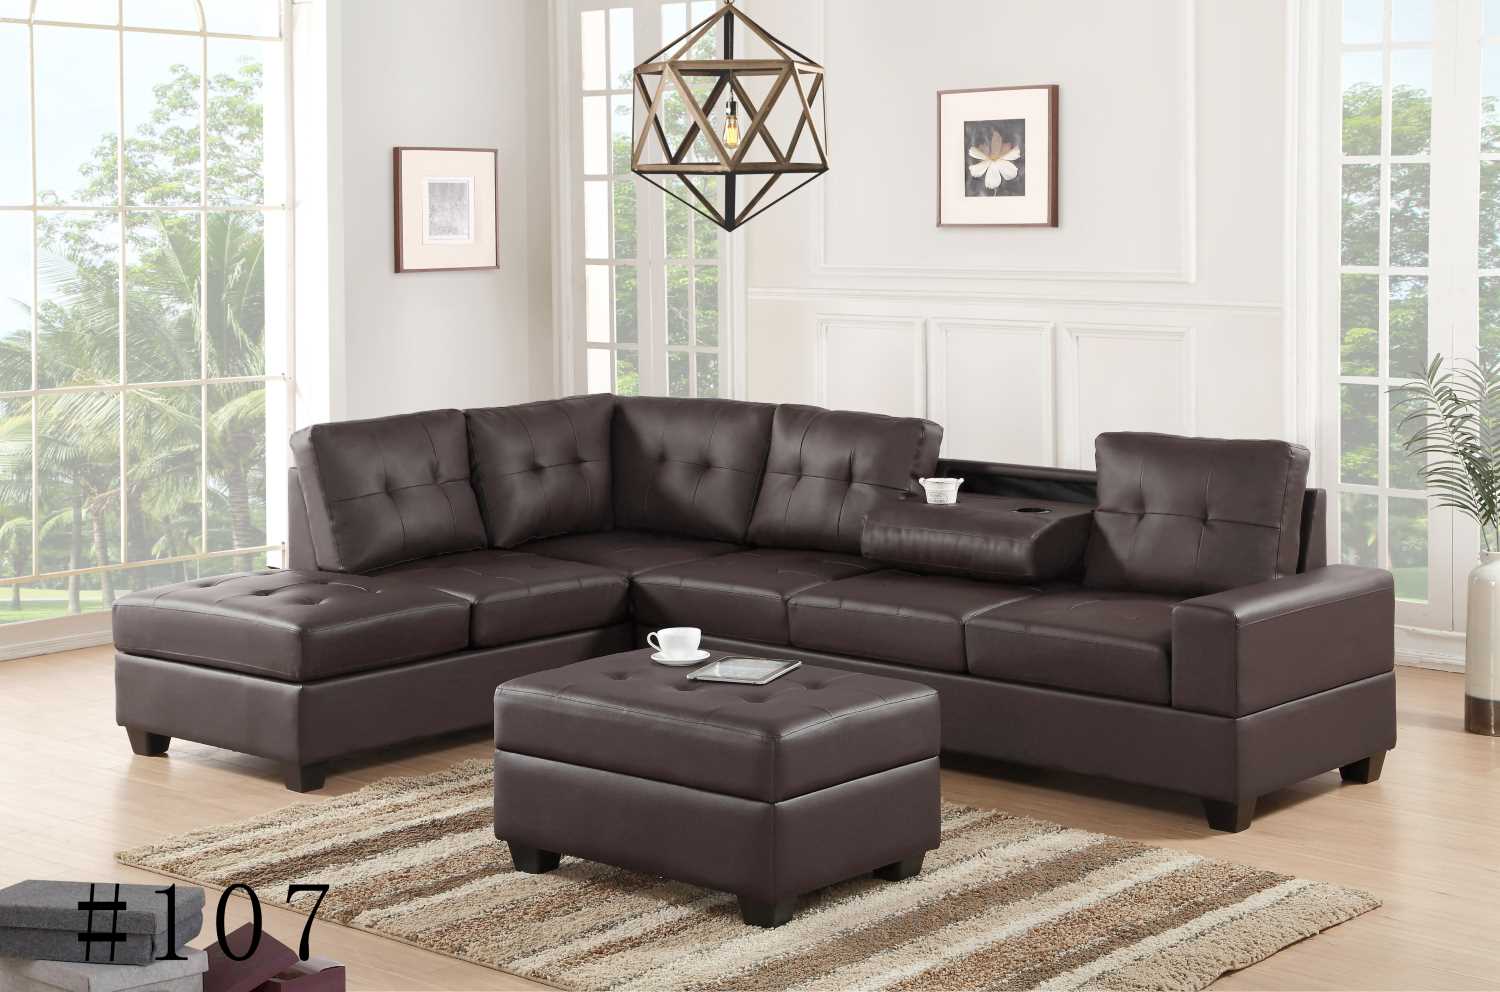 Roma Reversible Sectional Sofa with Ottoman - Brown PU